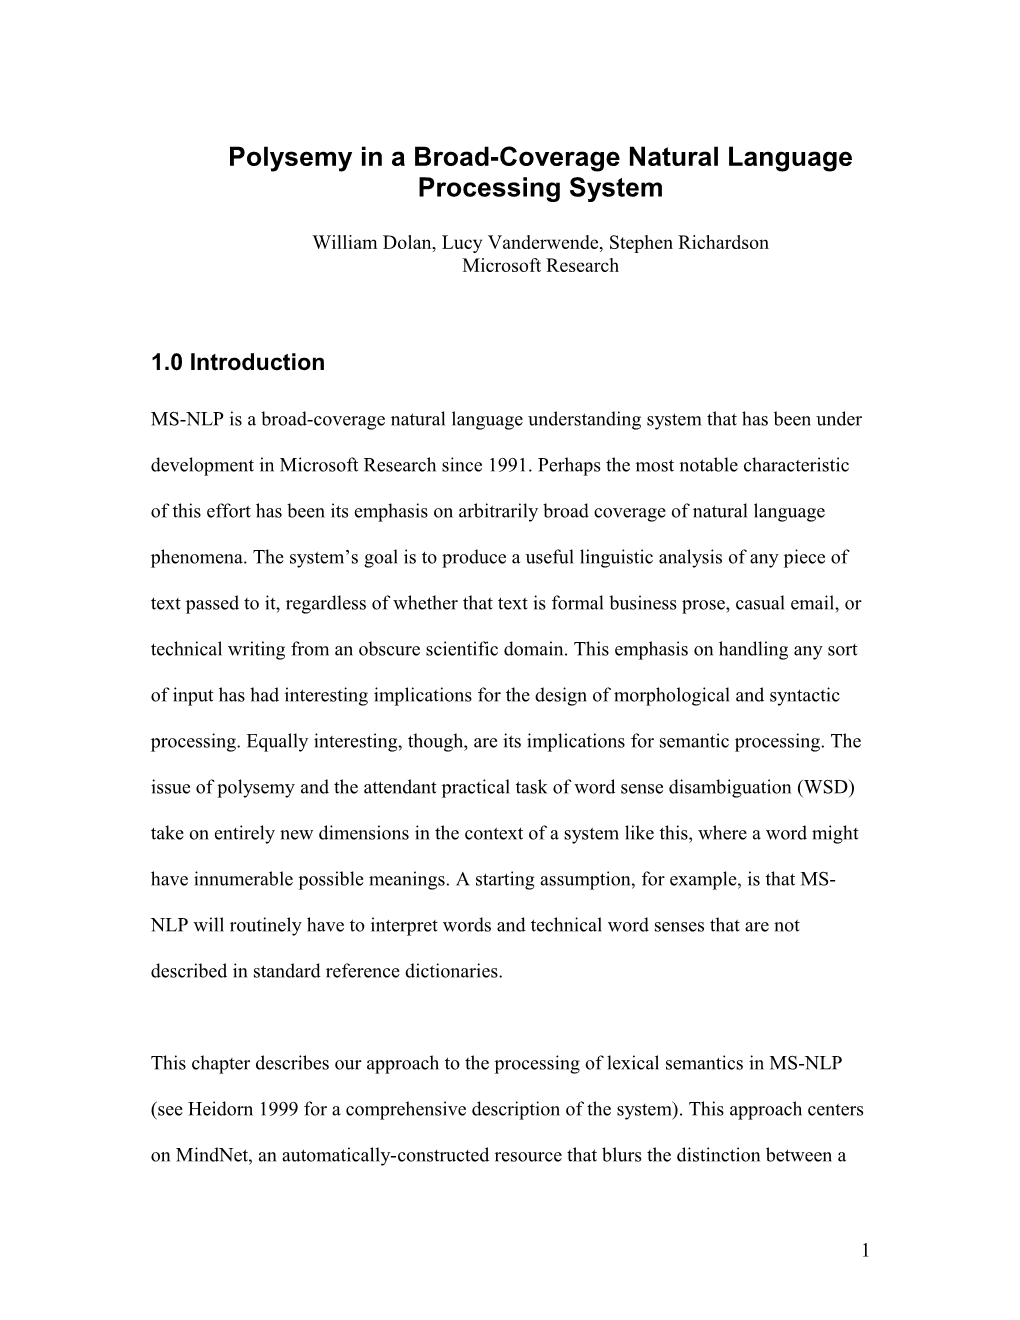 Polysemy and WSD in a Broad-Coverage NLP System